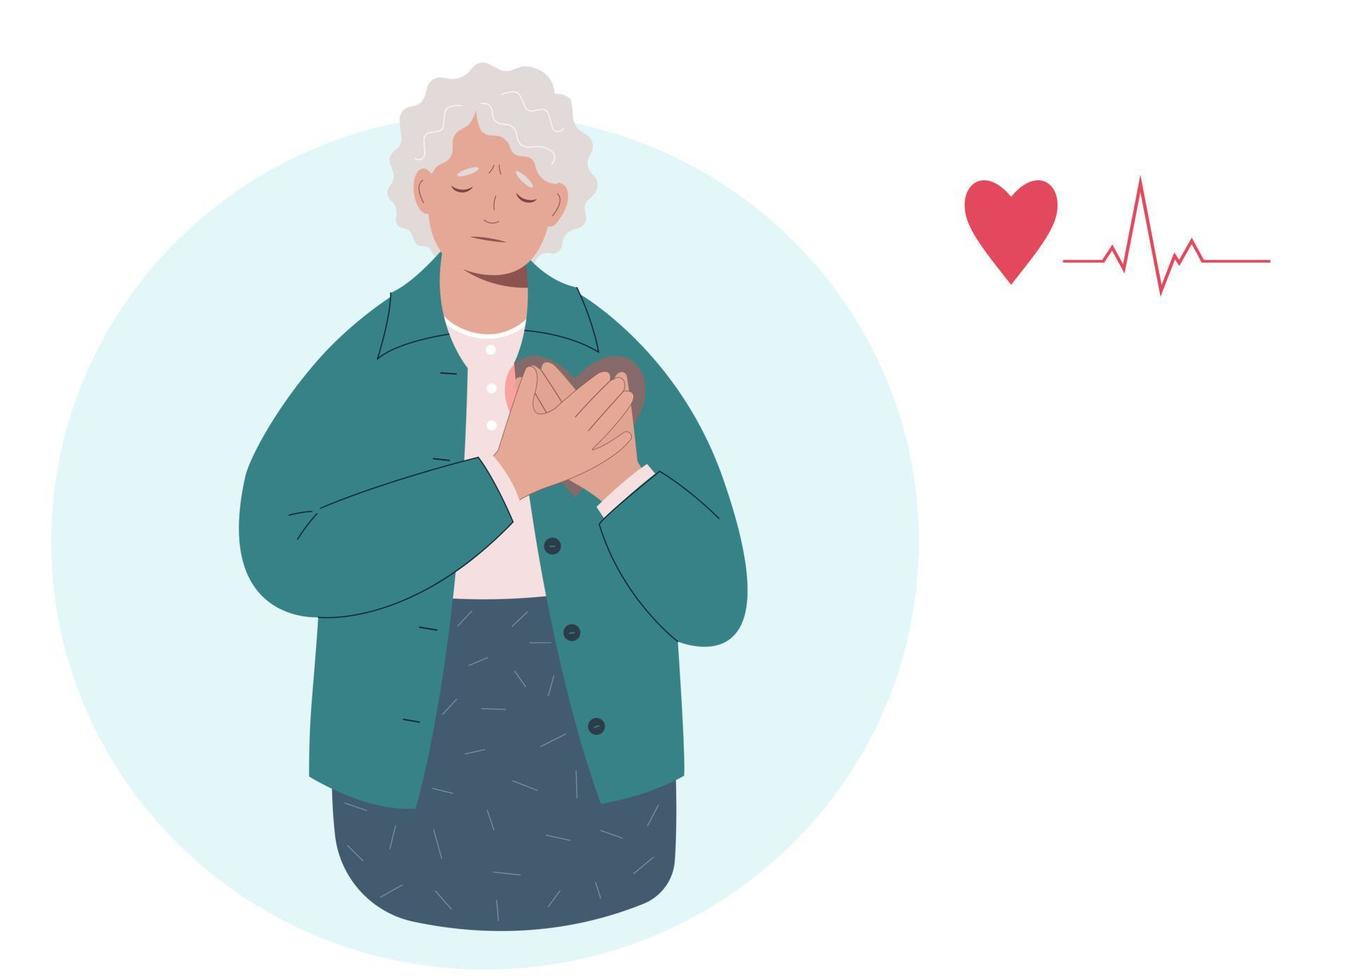 Elderly woman with heart attack, pain touching chest. Cardiovascular disease concept vector